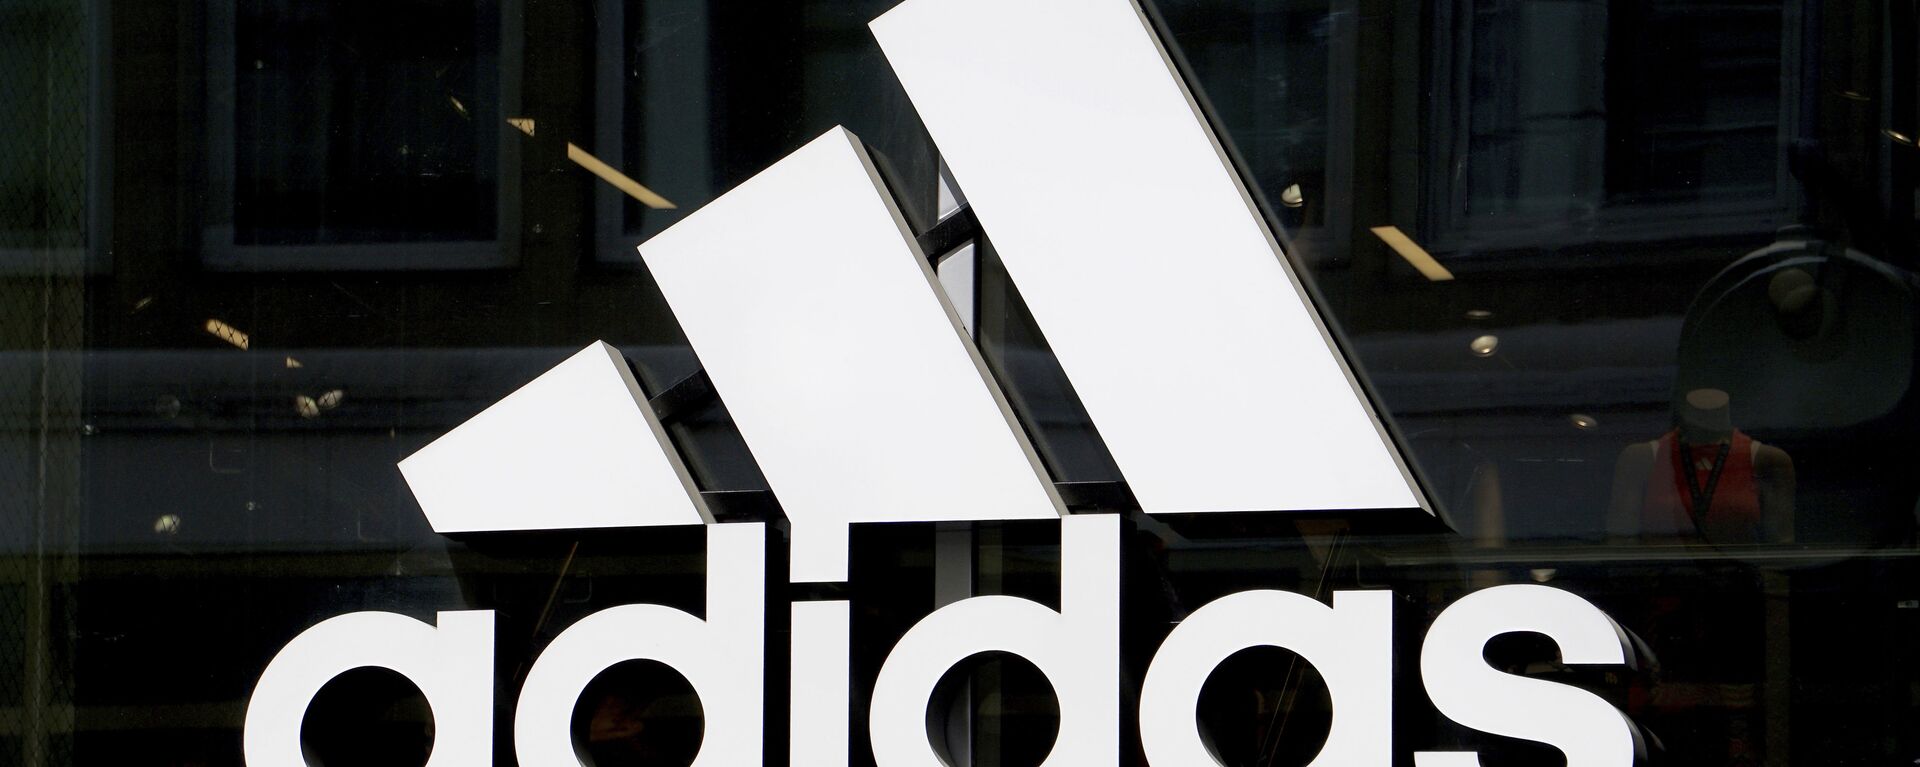 The logo of the sports goods manufacturer 'adidas' is pictured in Berlin, Germany, Monday, May 6, 2019 - Sputnik International, 1920, 19.06.2019